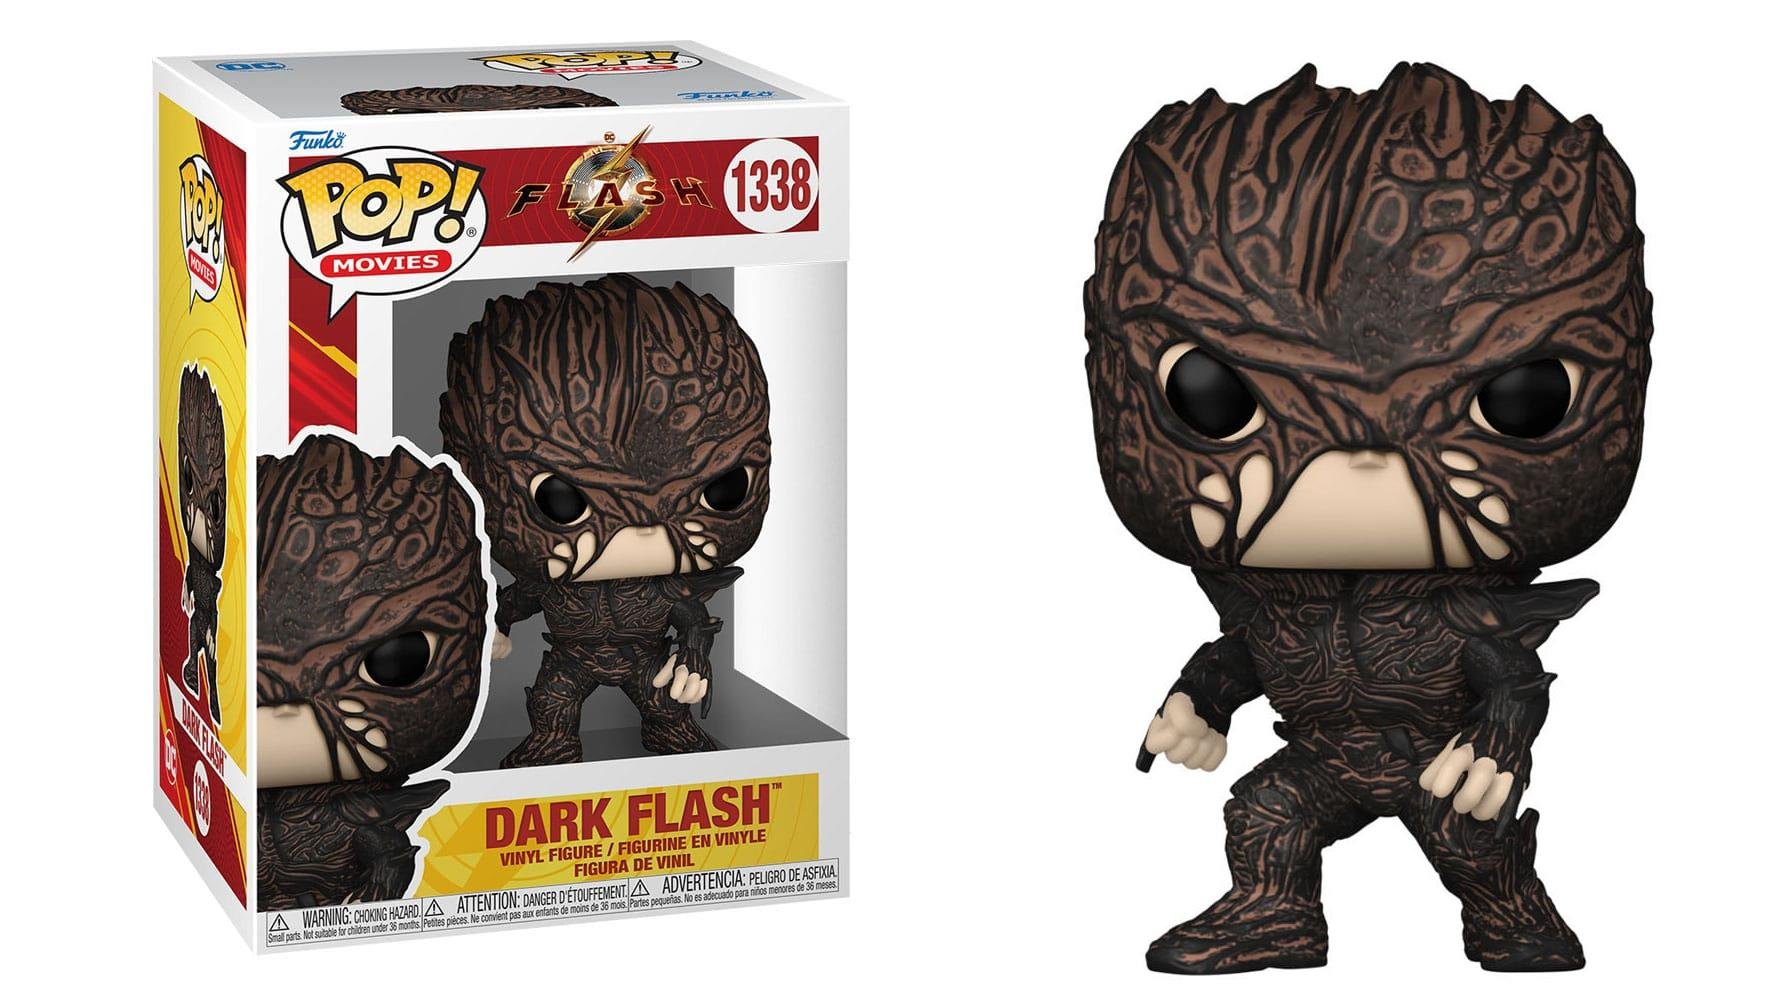 Funko POP! DC Heroes: The Flash - Dark Flash #1338 - Vaulted Collectibles